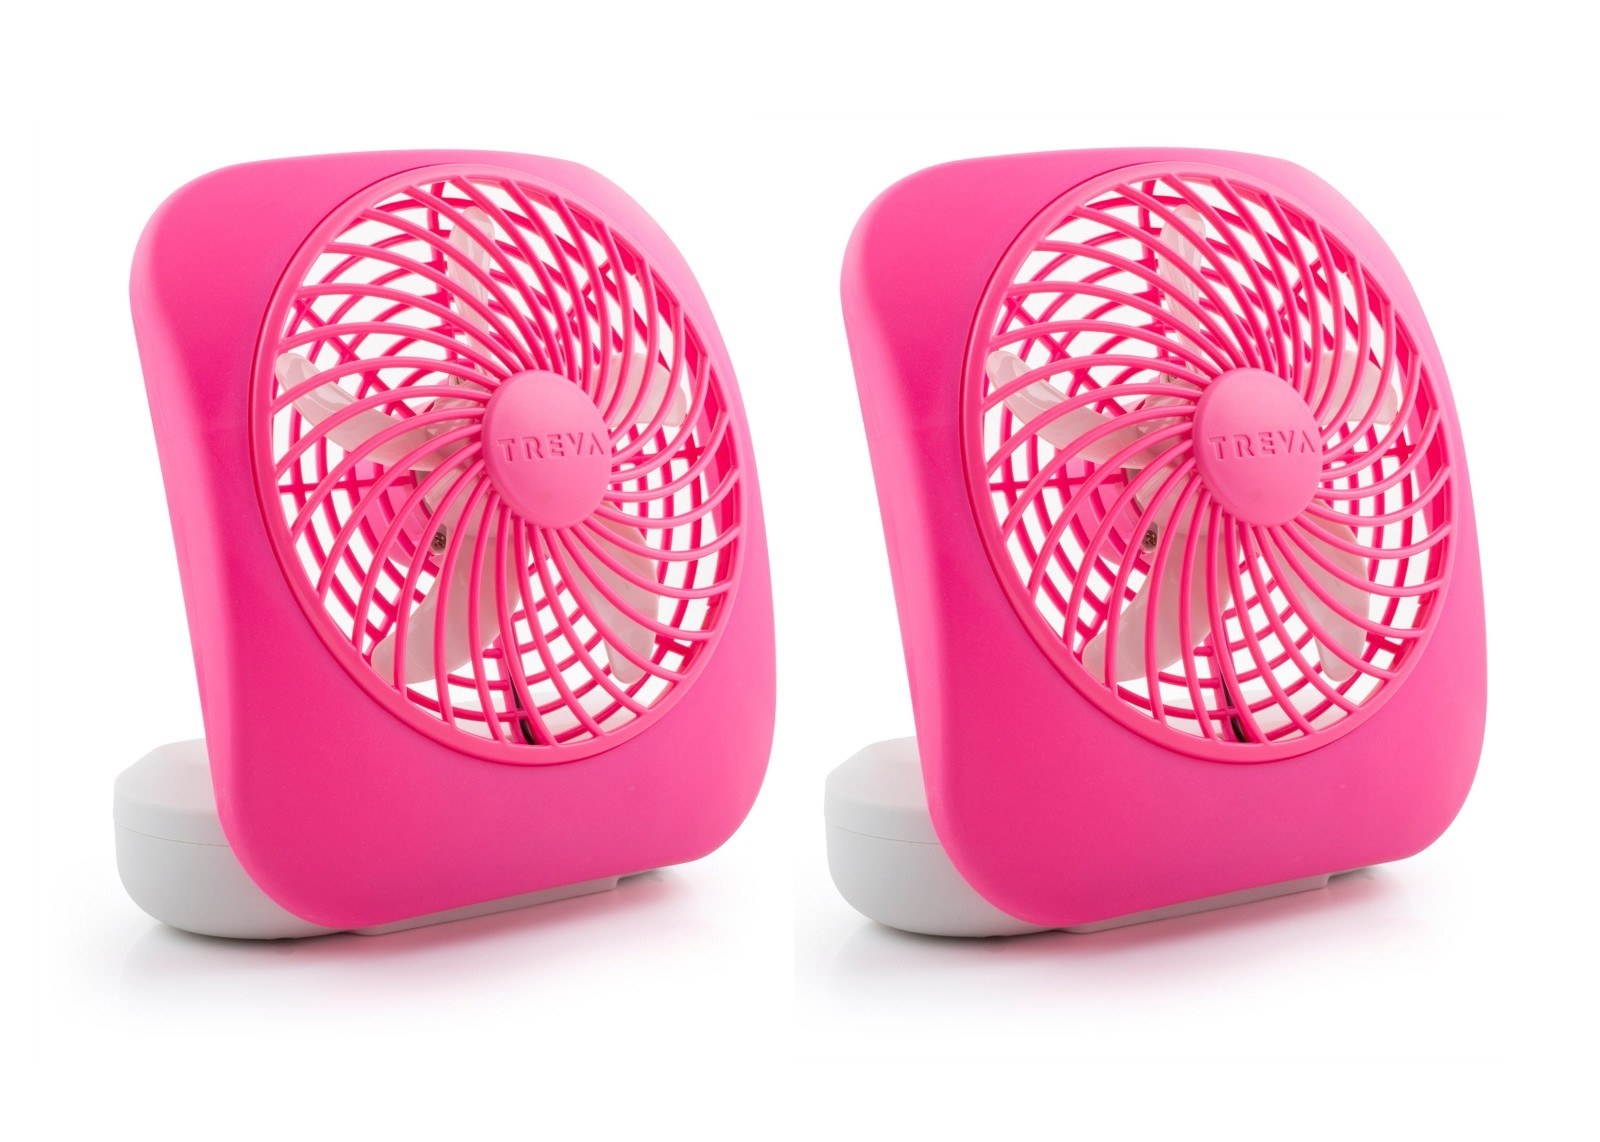 personal battery-powered fans